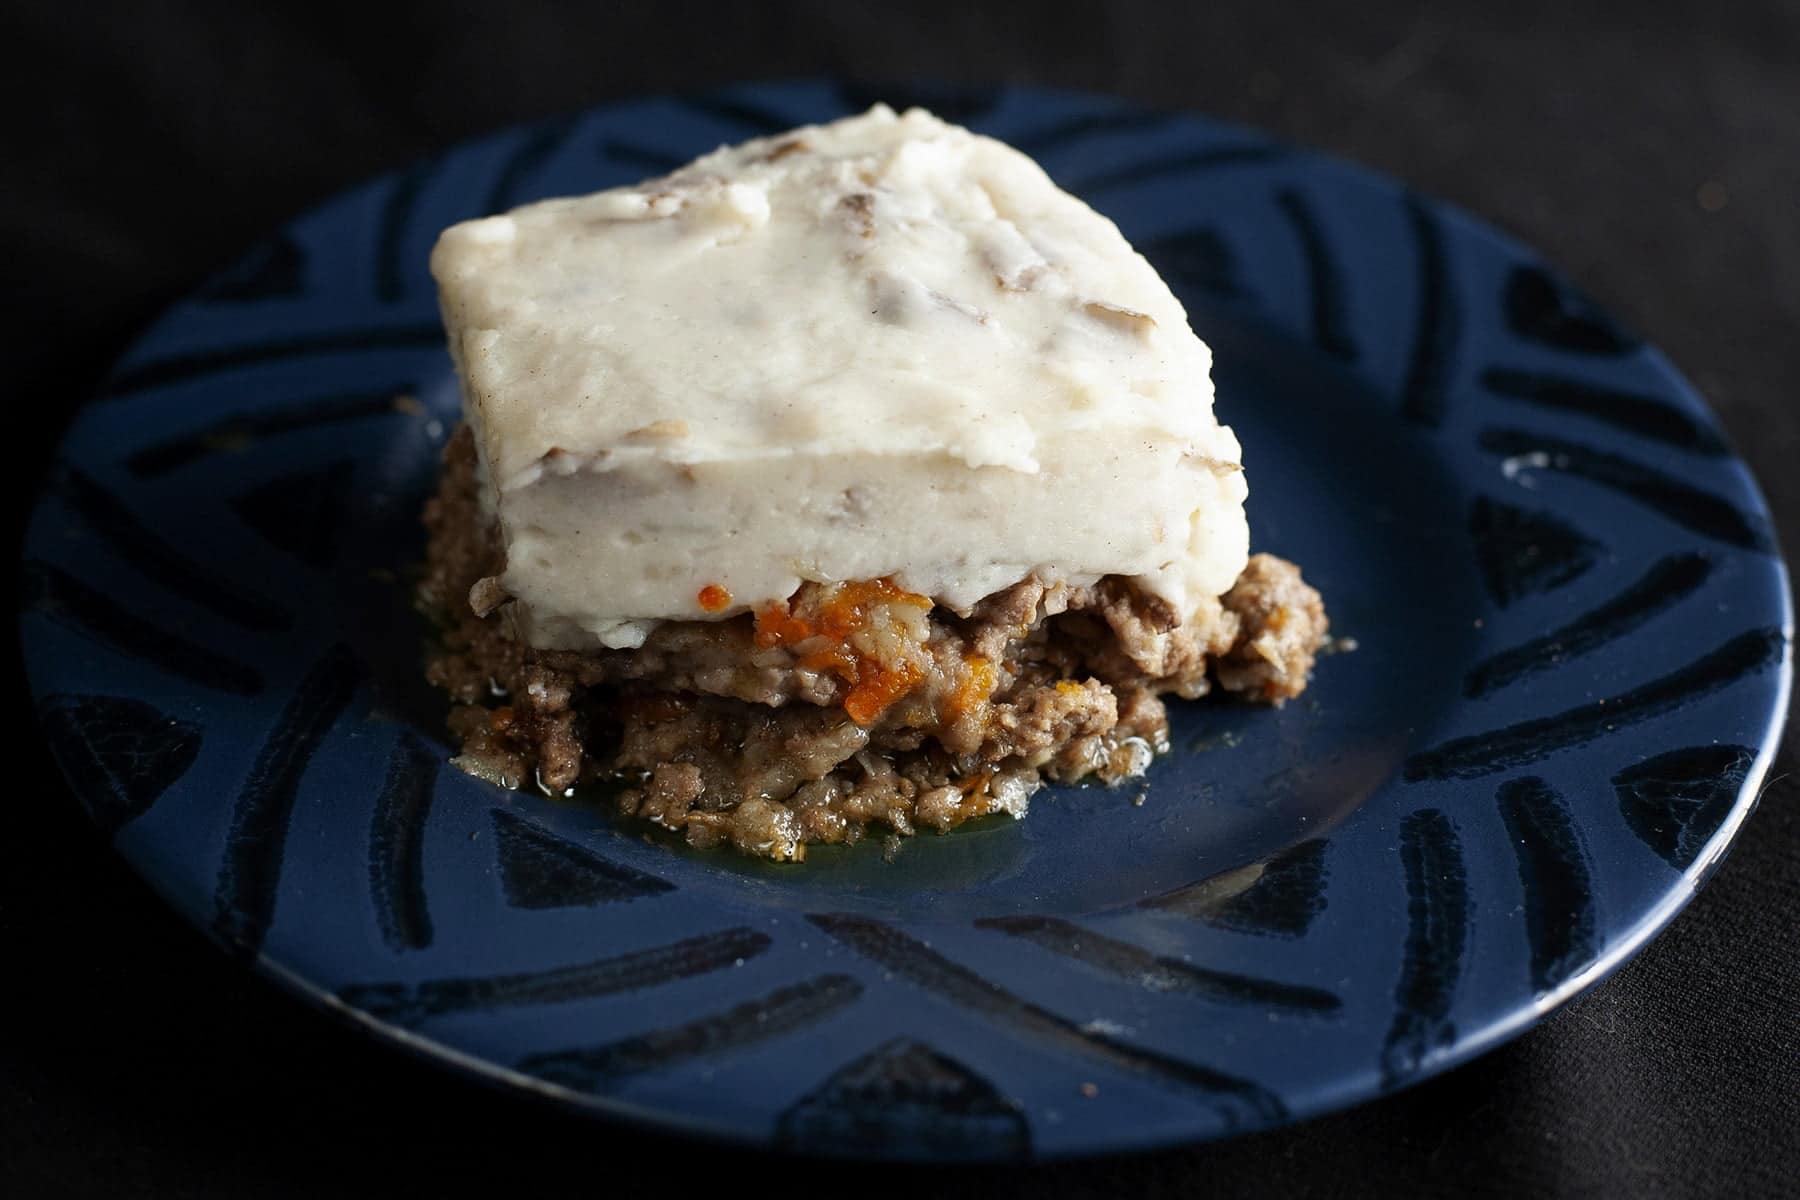 A square serving of shepherd's pie is centered on a blue plate. Carrots and parsnips are visible in the meat/veg base, and it's topped with a thick layer of mashed potatoes.